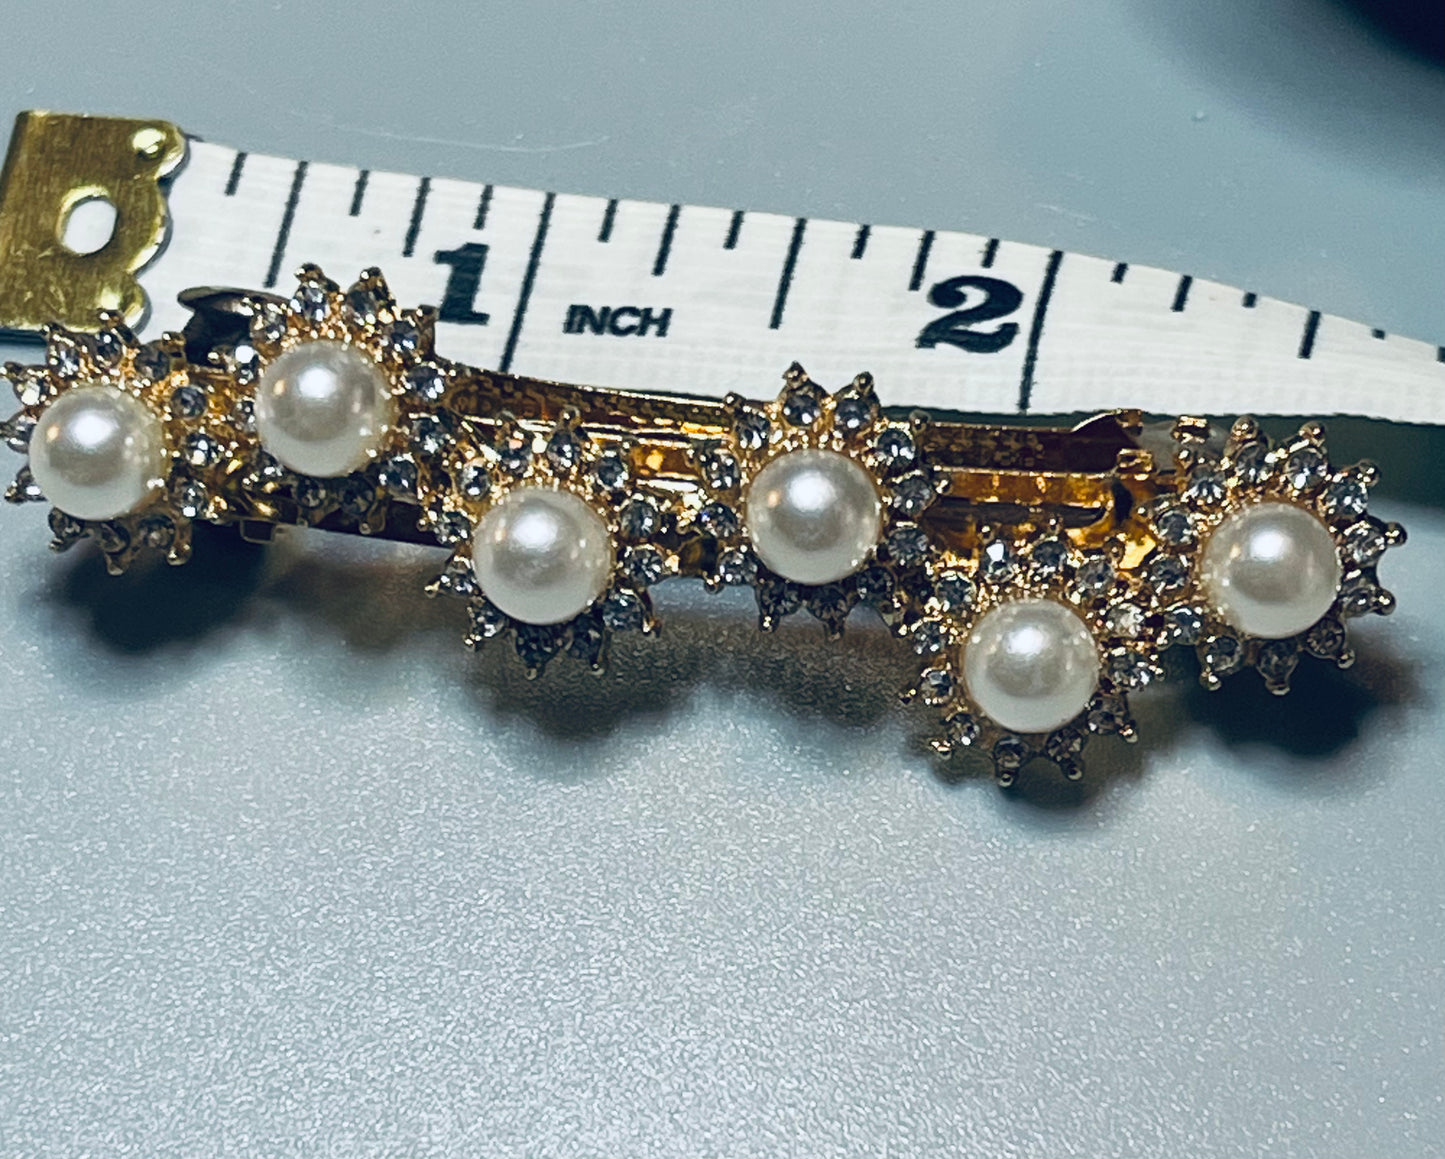 White faux Pearl Crystal rhinestone barrette approximately 2.75” gold tone formal hair accessories gift wedding bridesmaid prom birthday mother of bride groom